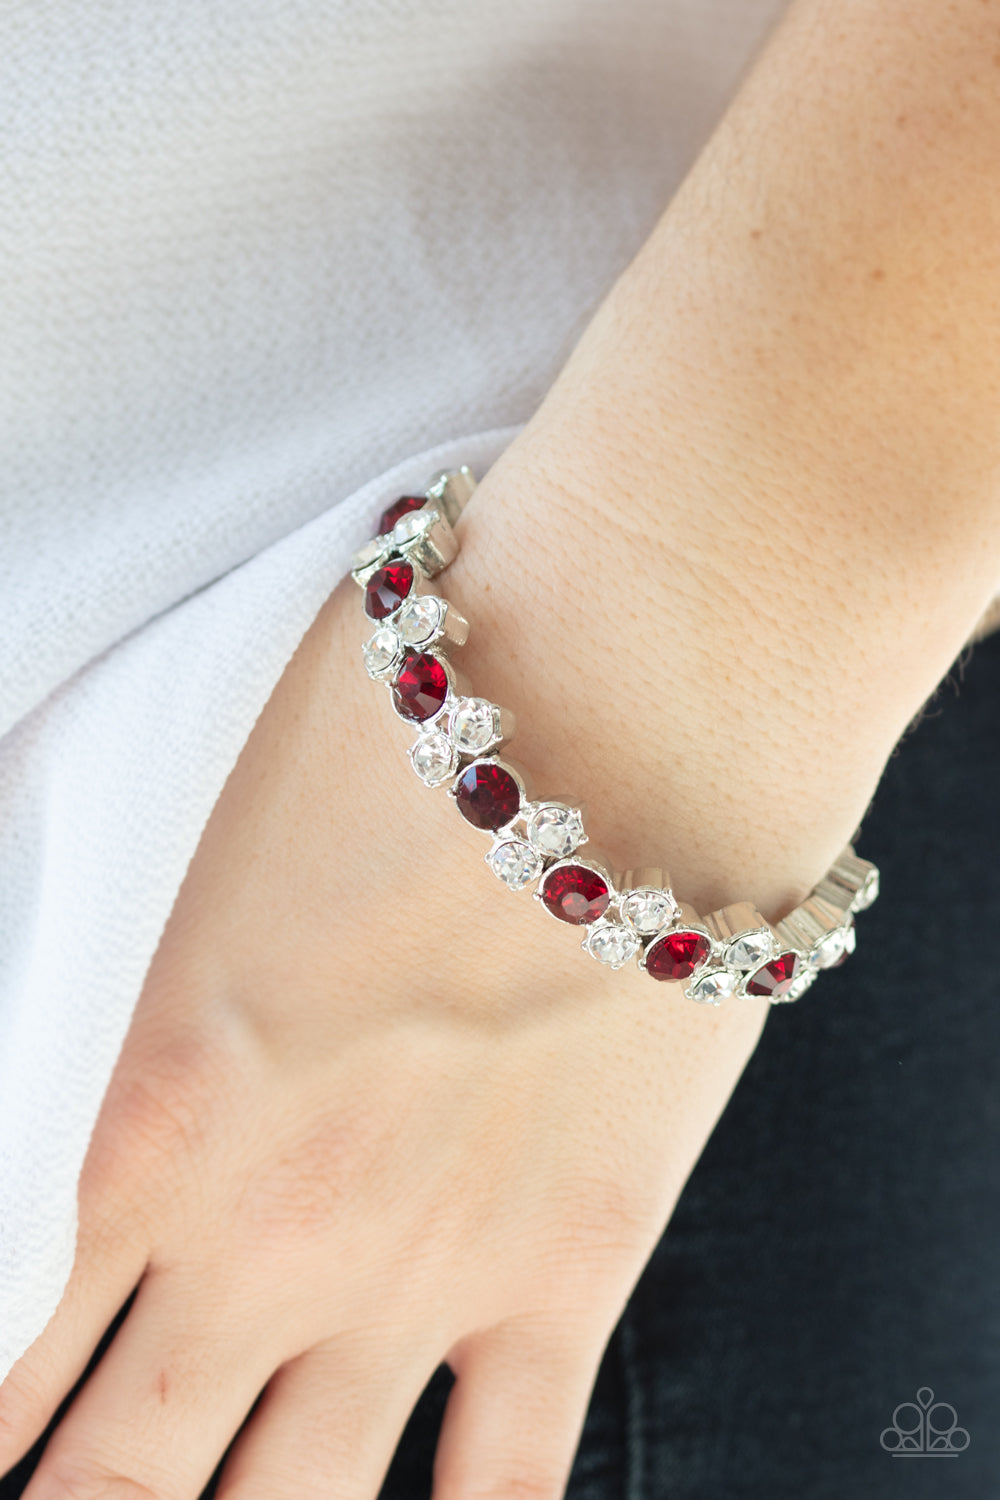 Here Comes The BRIBE - Red and White Rhinestone Stretchy Bracelet - Paparazzi Accessories